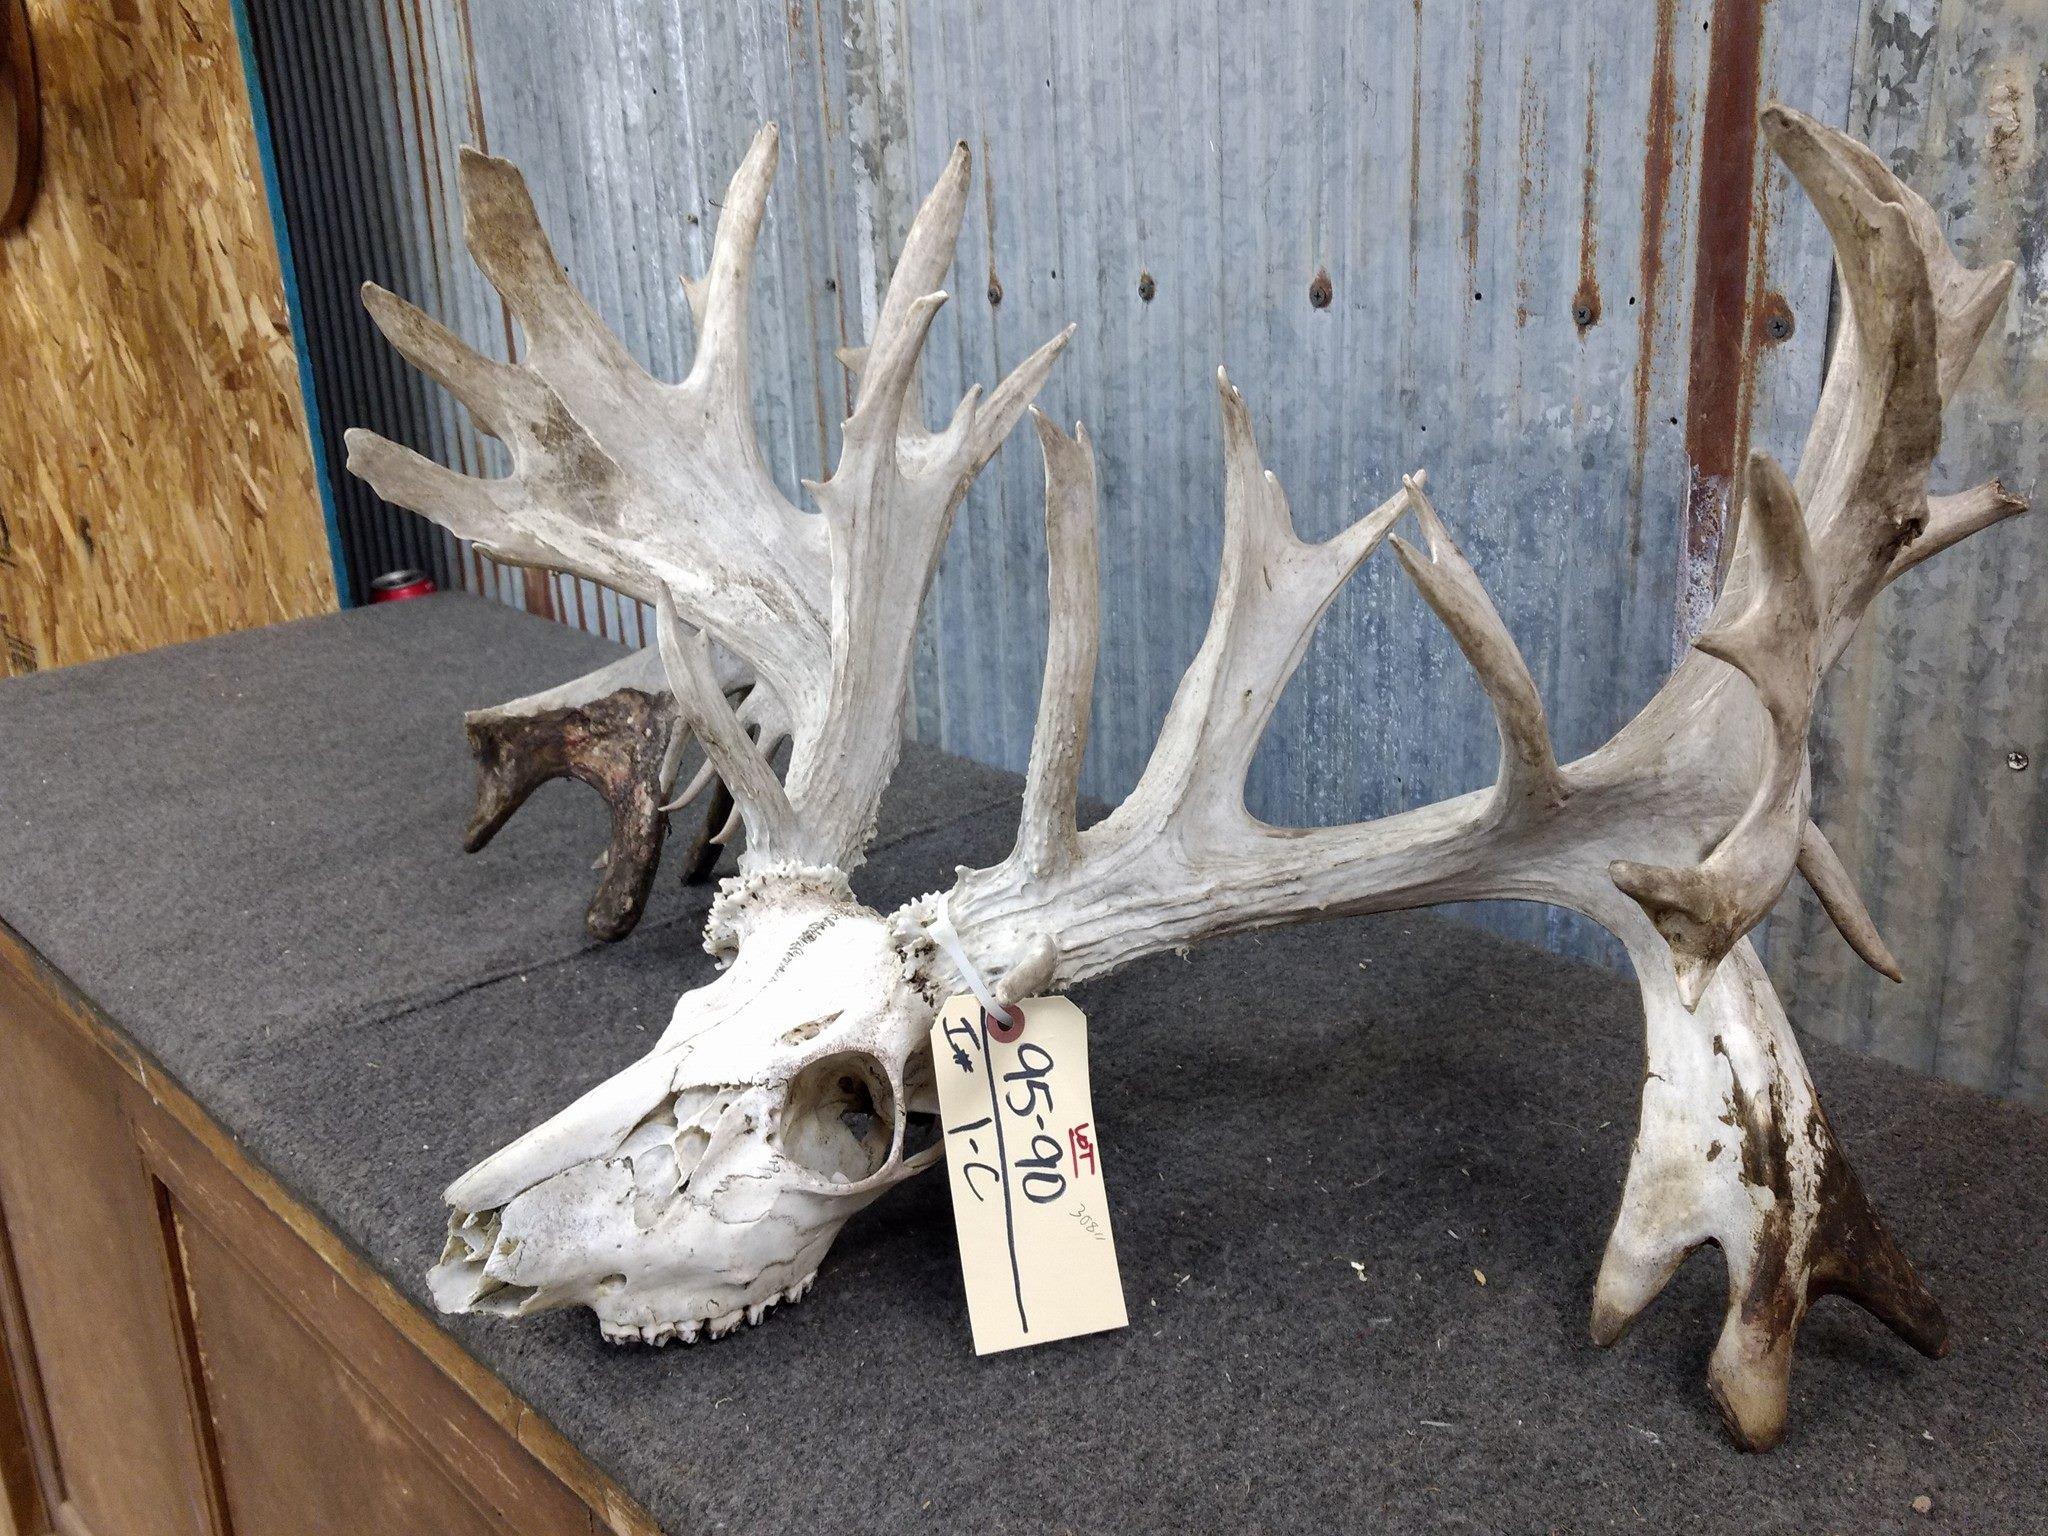 308" Whitetail Rack On Skull Drop Tines Lots Of Extras 